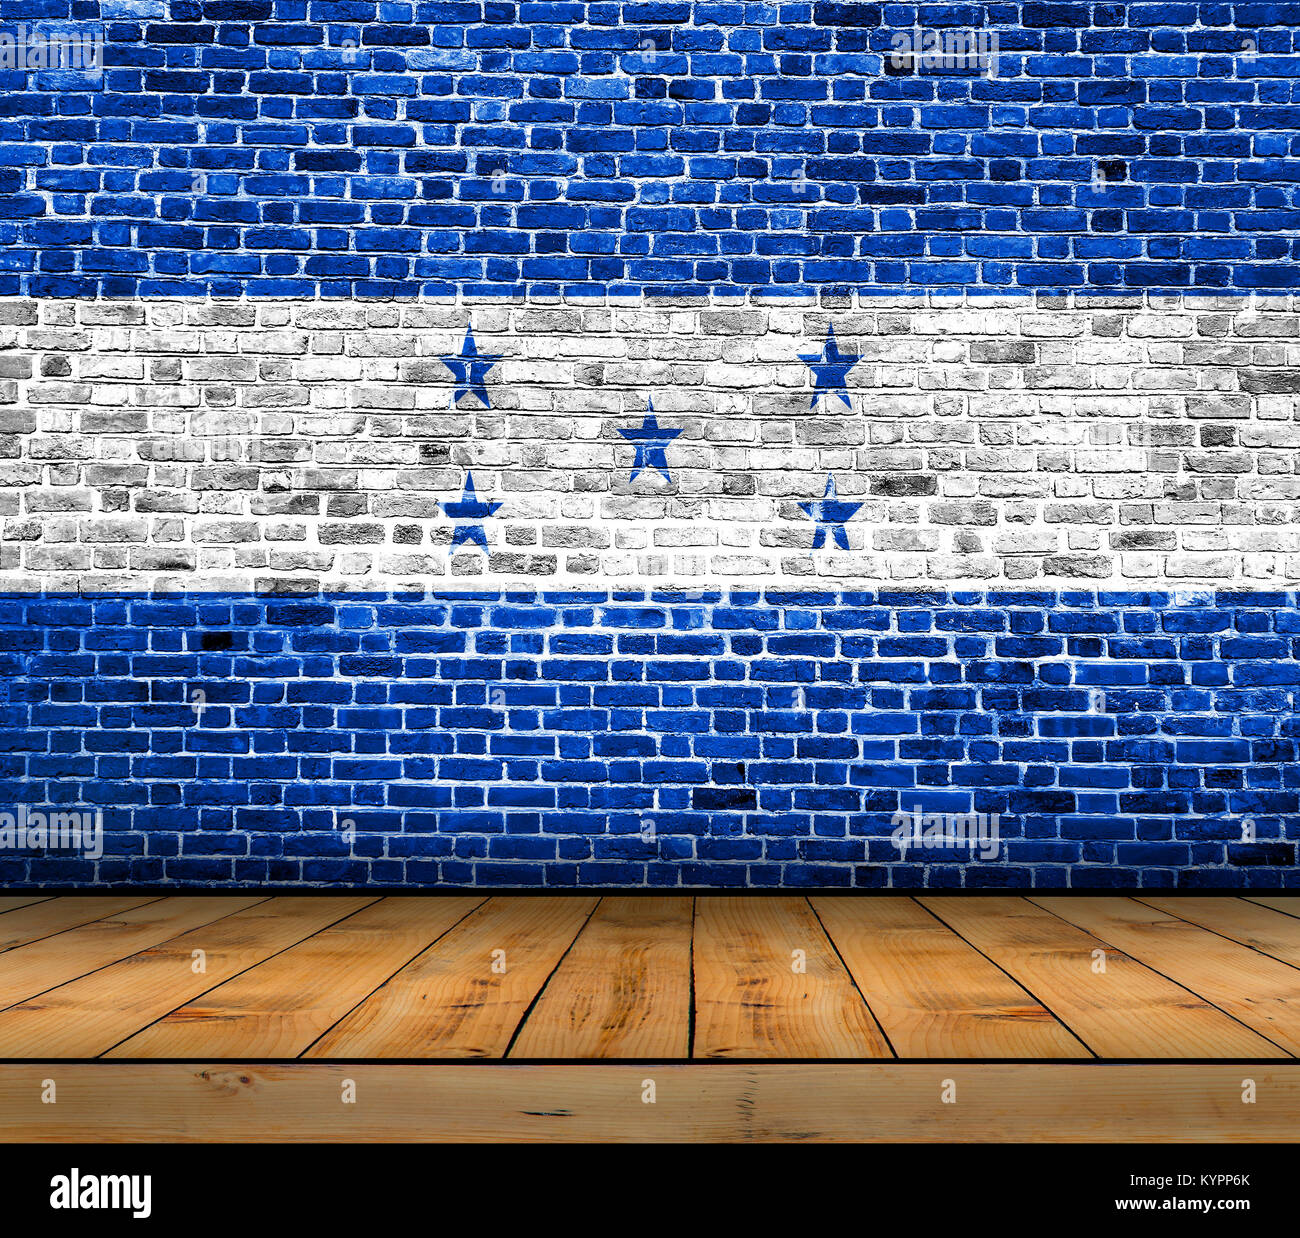 Honduras flag painted on brick wall with wooden floor Stock Photo